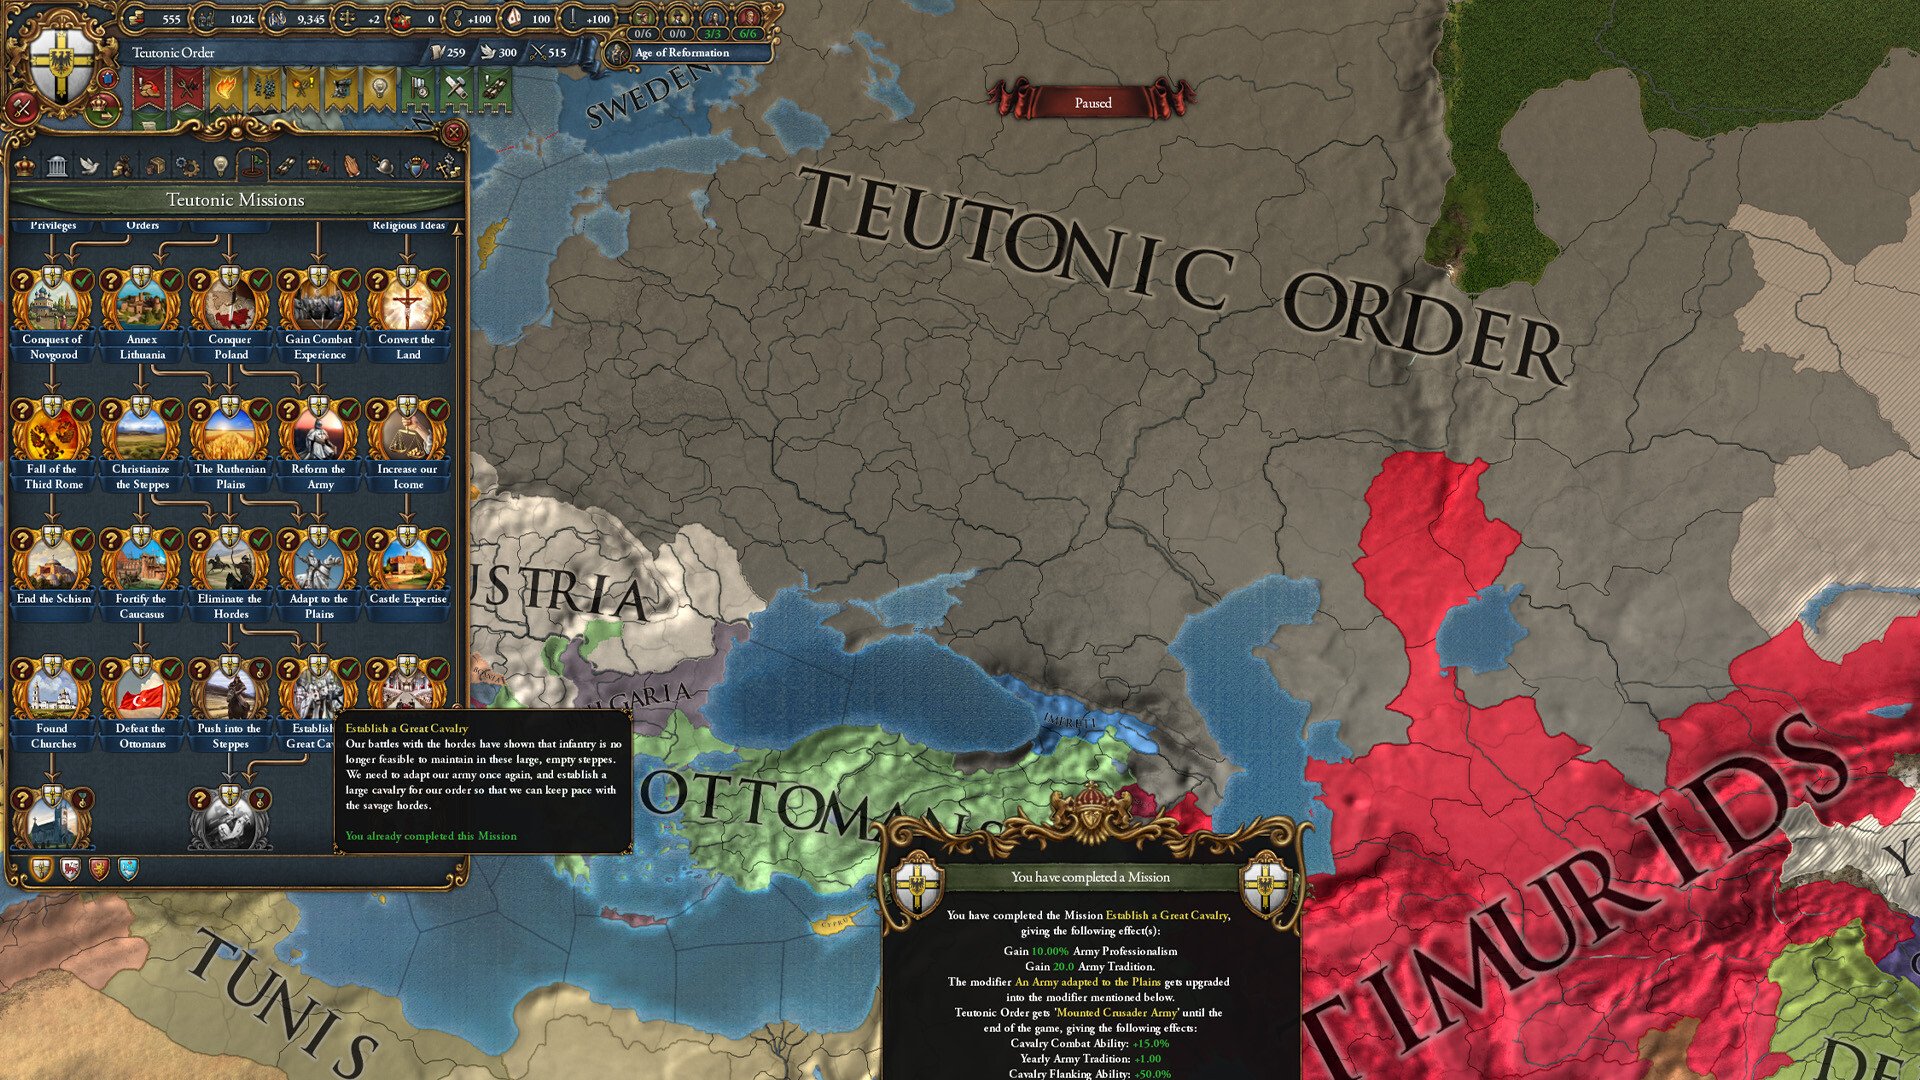 Obrázek ESD Europa Universalis IV Lions of the North